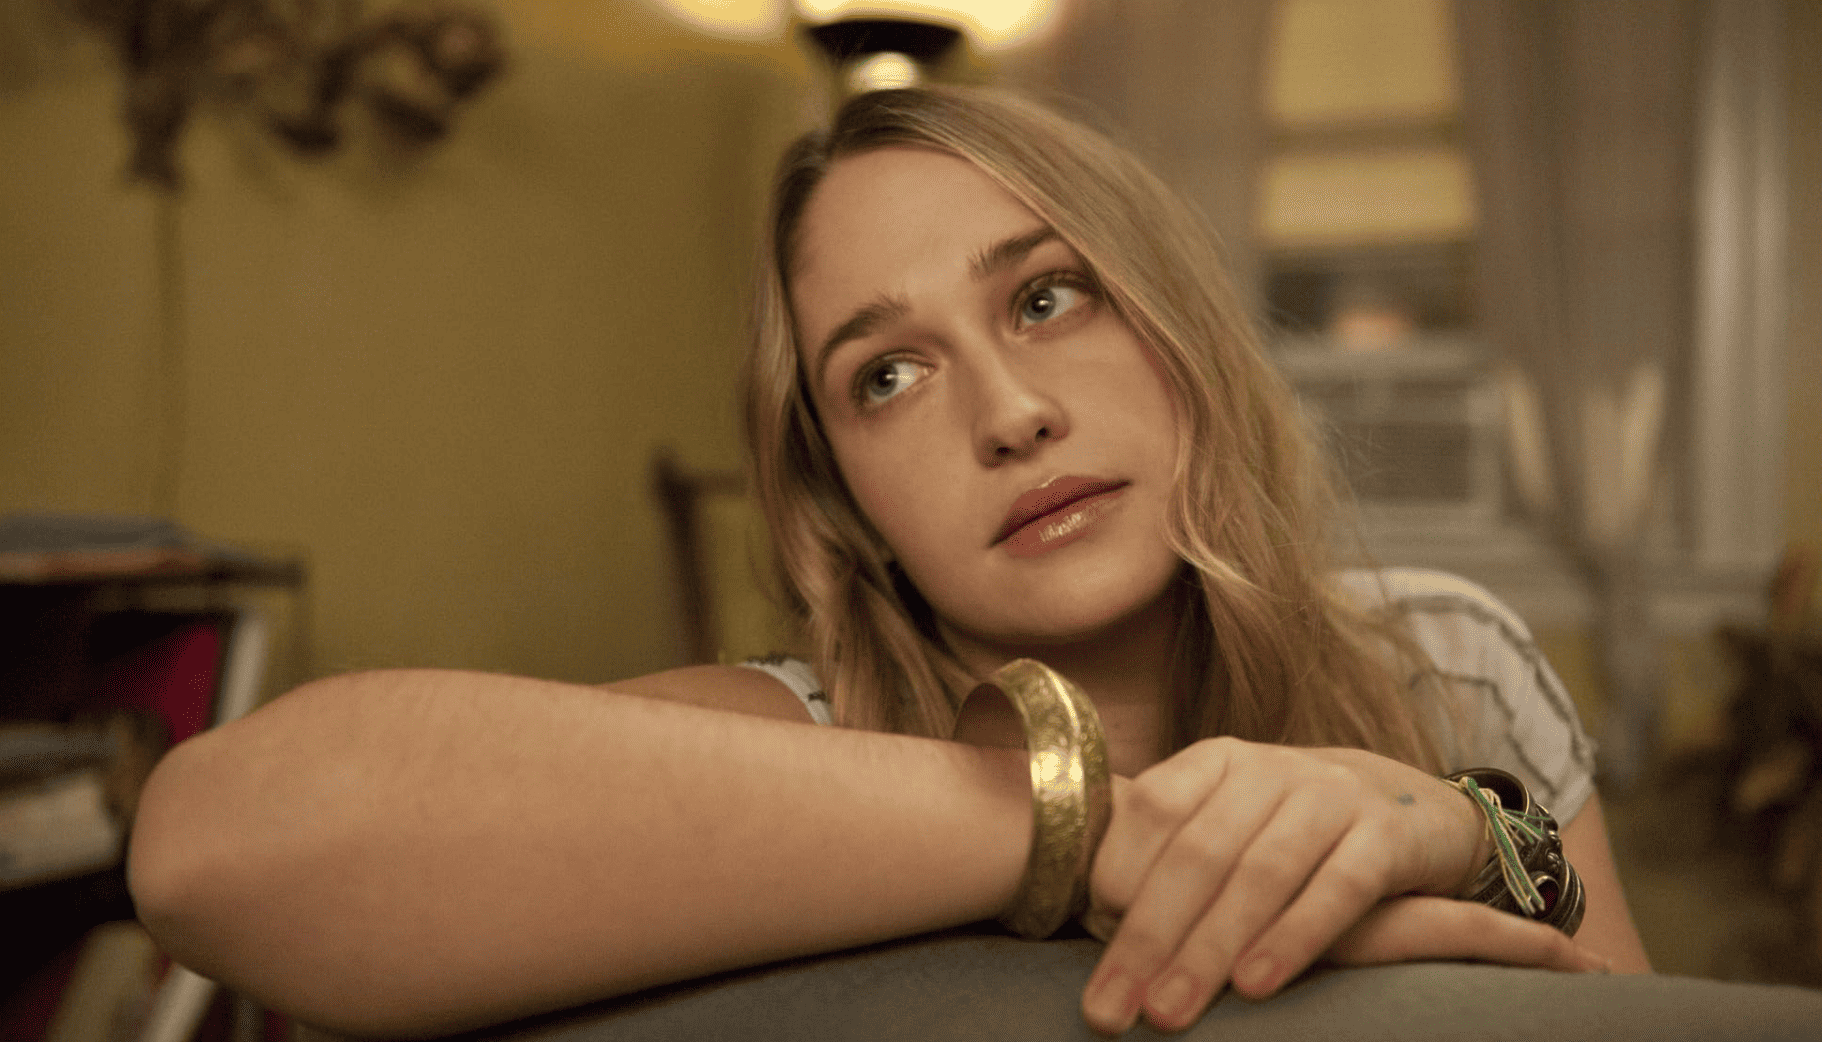 A wide-eyed Jemima Kirke resting her arms on the back of the couch while staring off-camera at the ceiling in this image from Apatow Productions